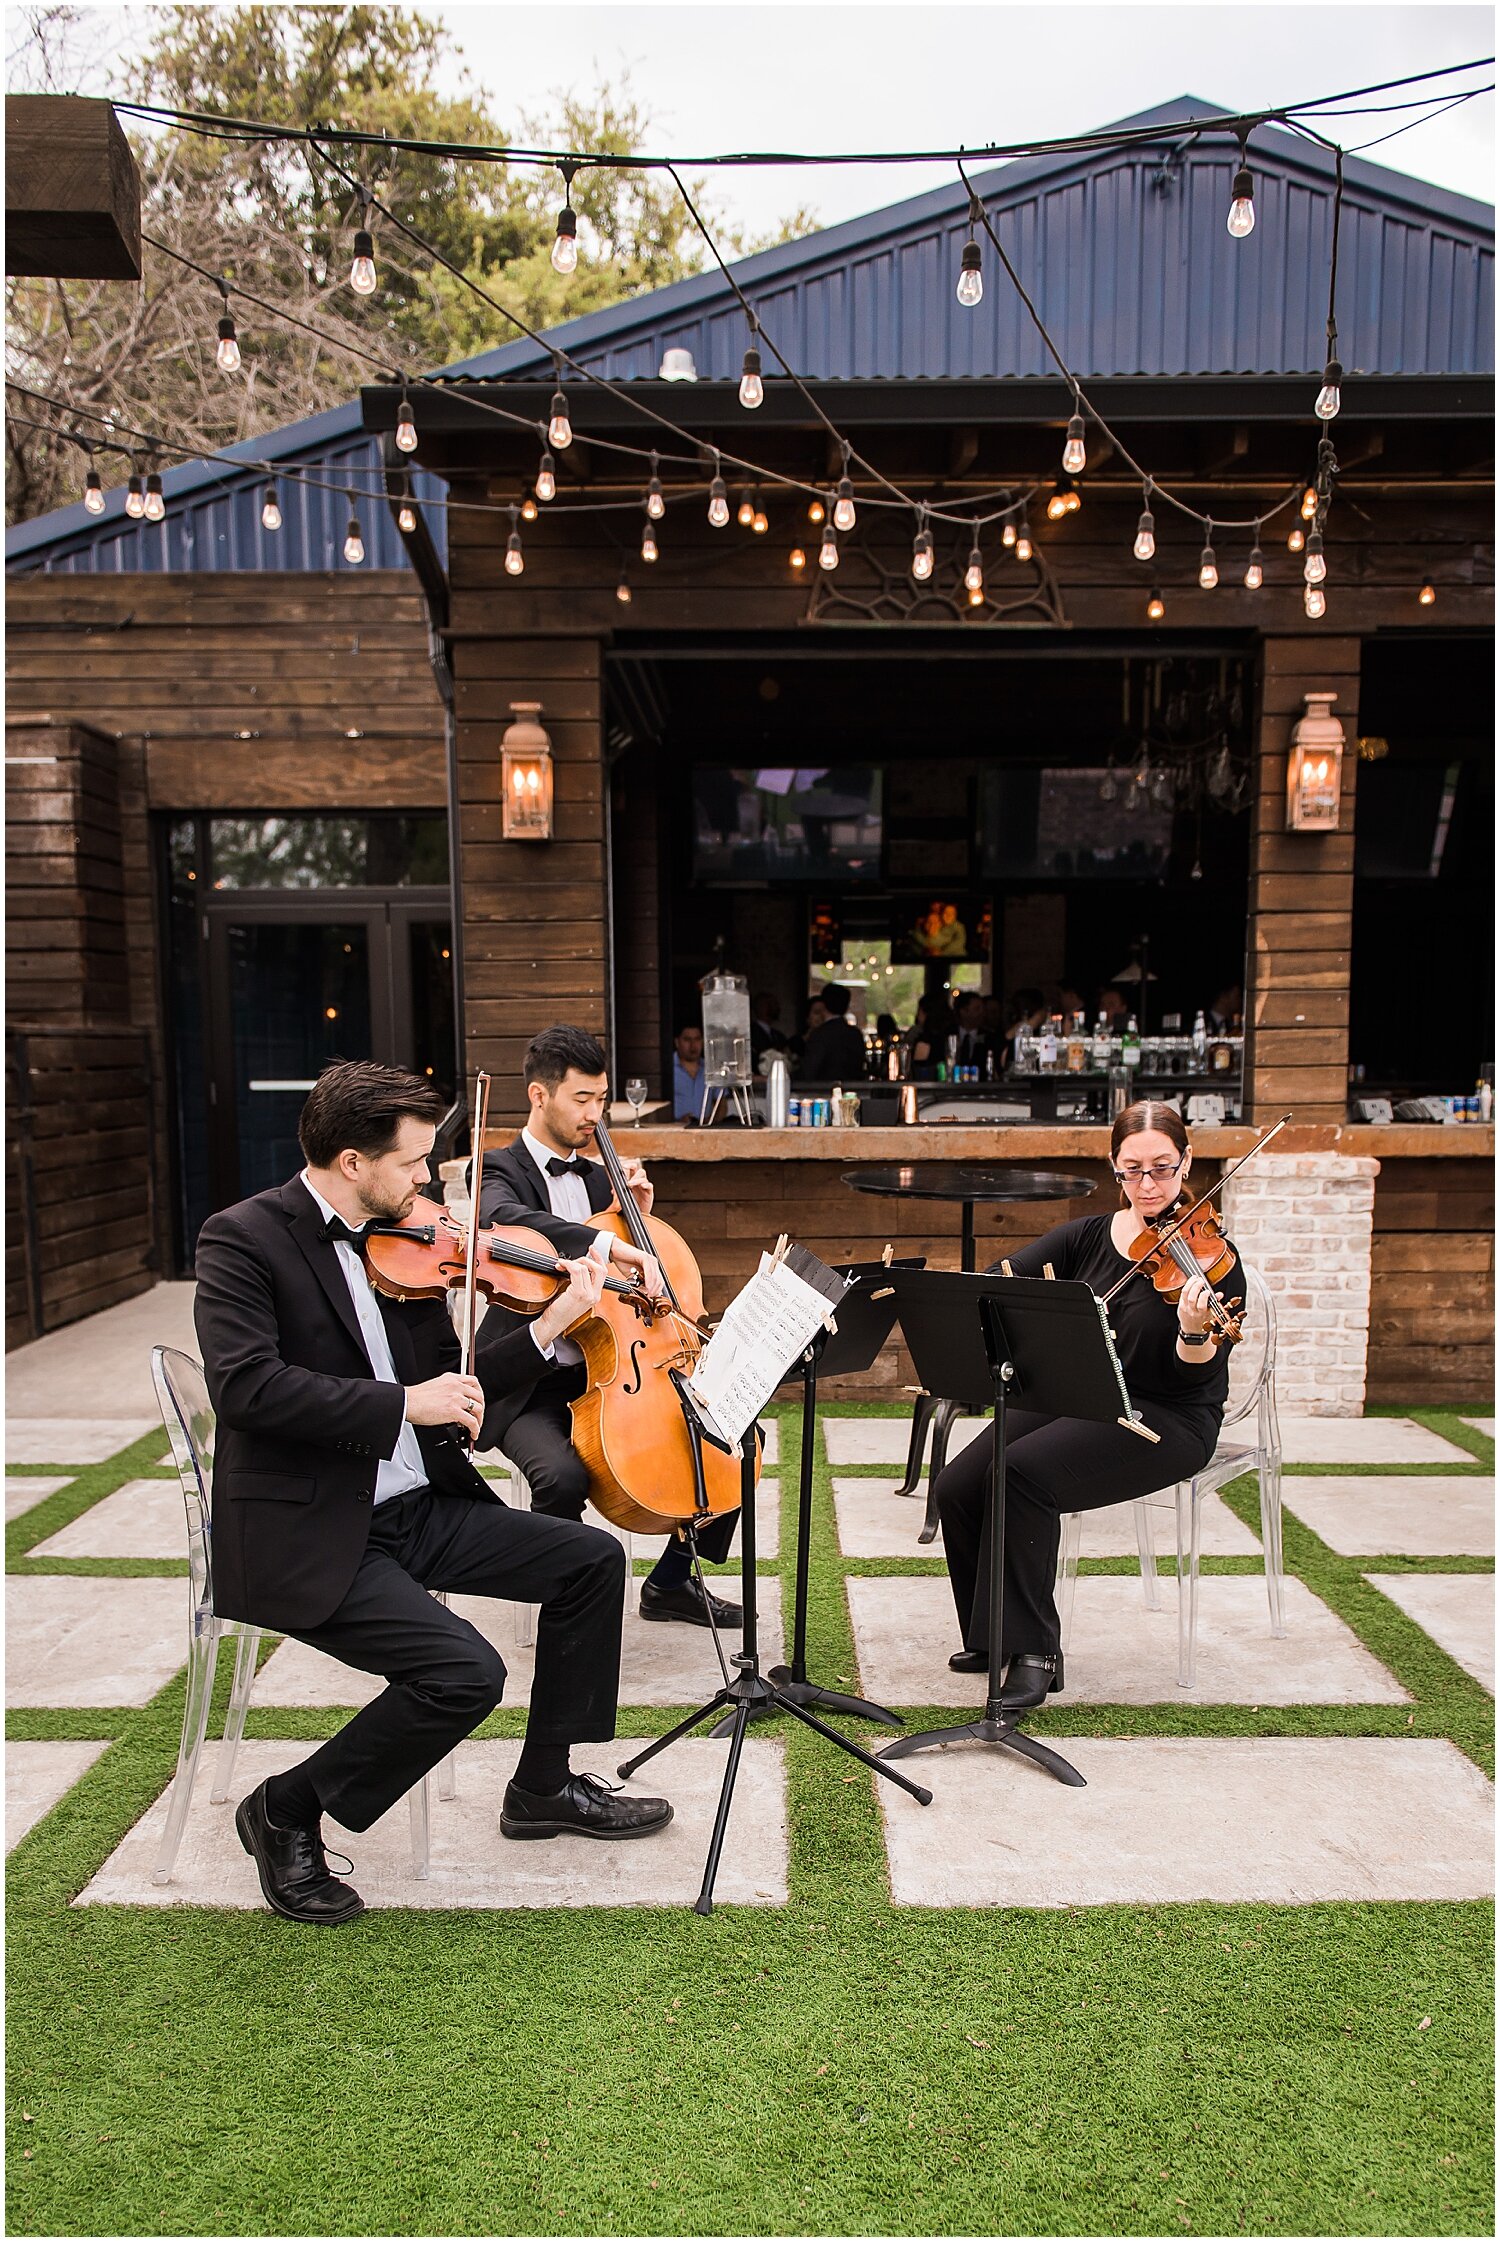  string musicians playing during the wedding ceremony 